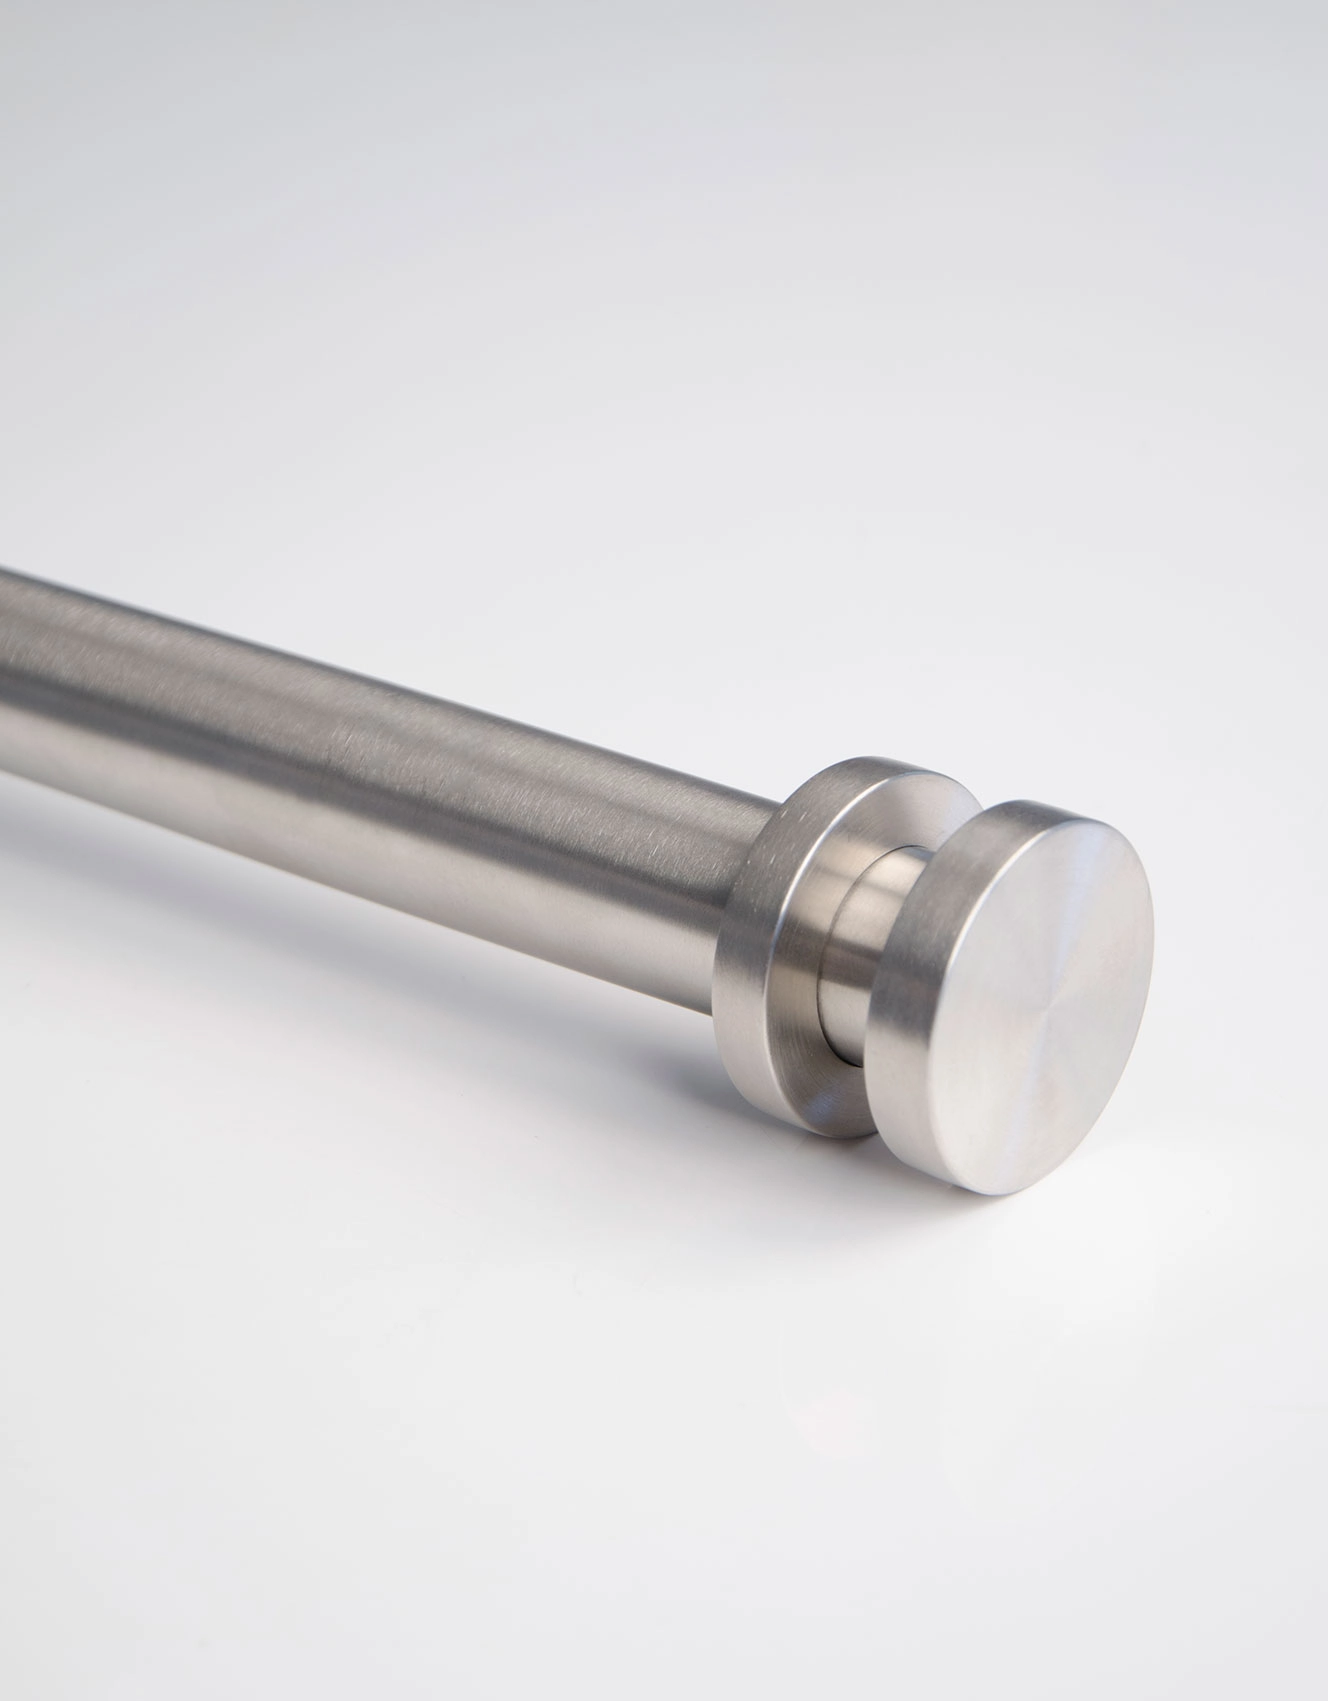 Infront stainless steel curtain rod from Hasta Home